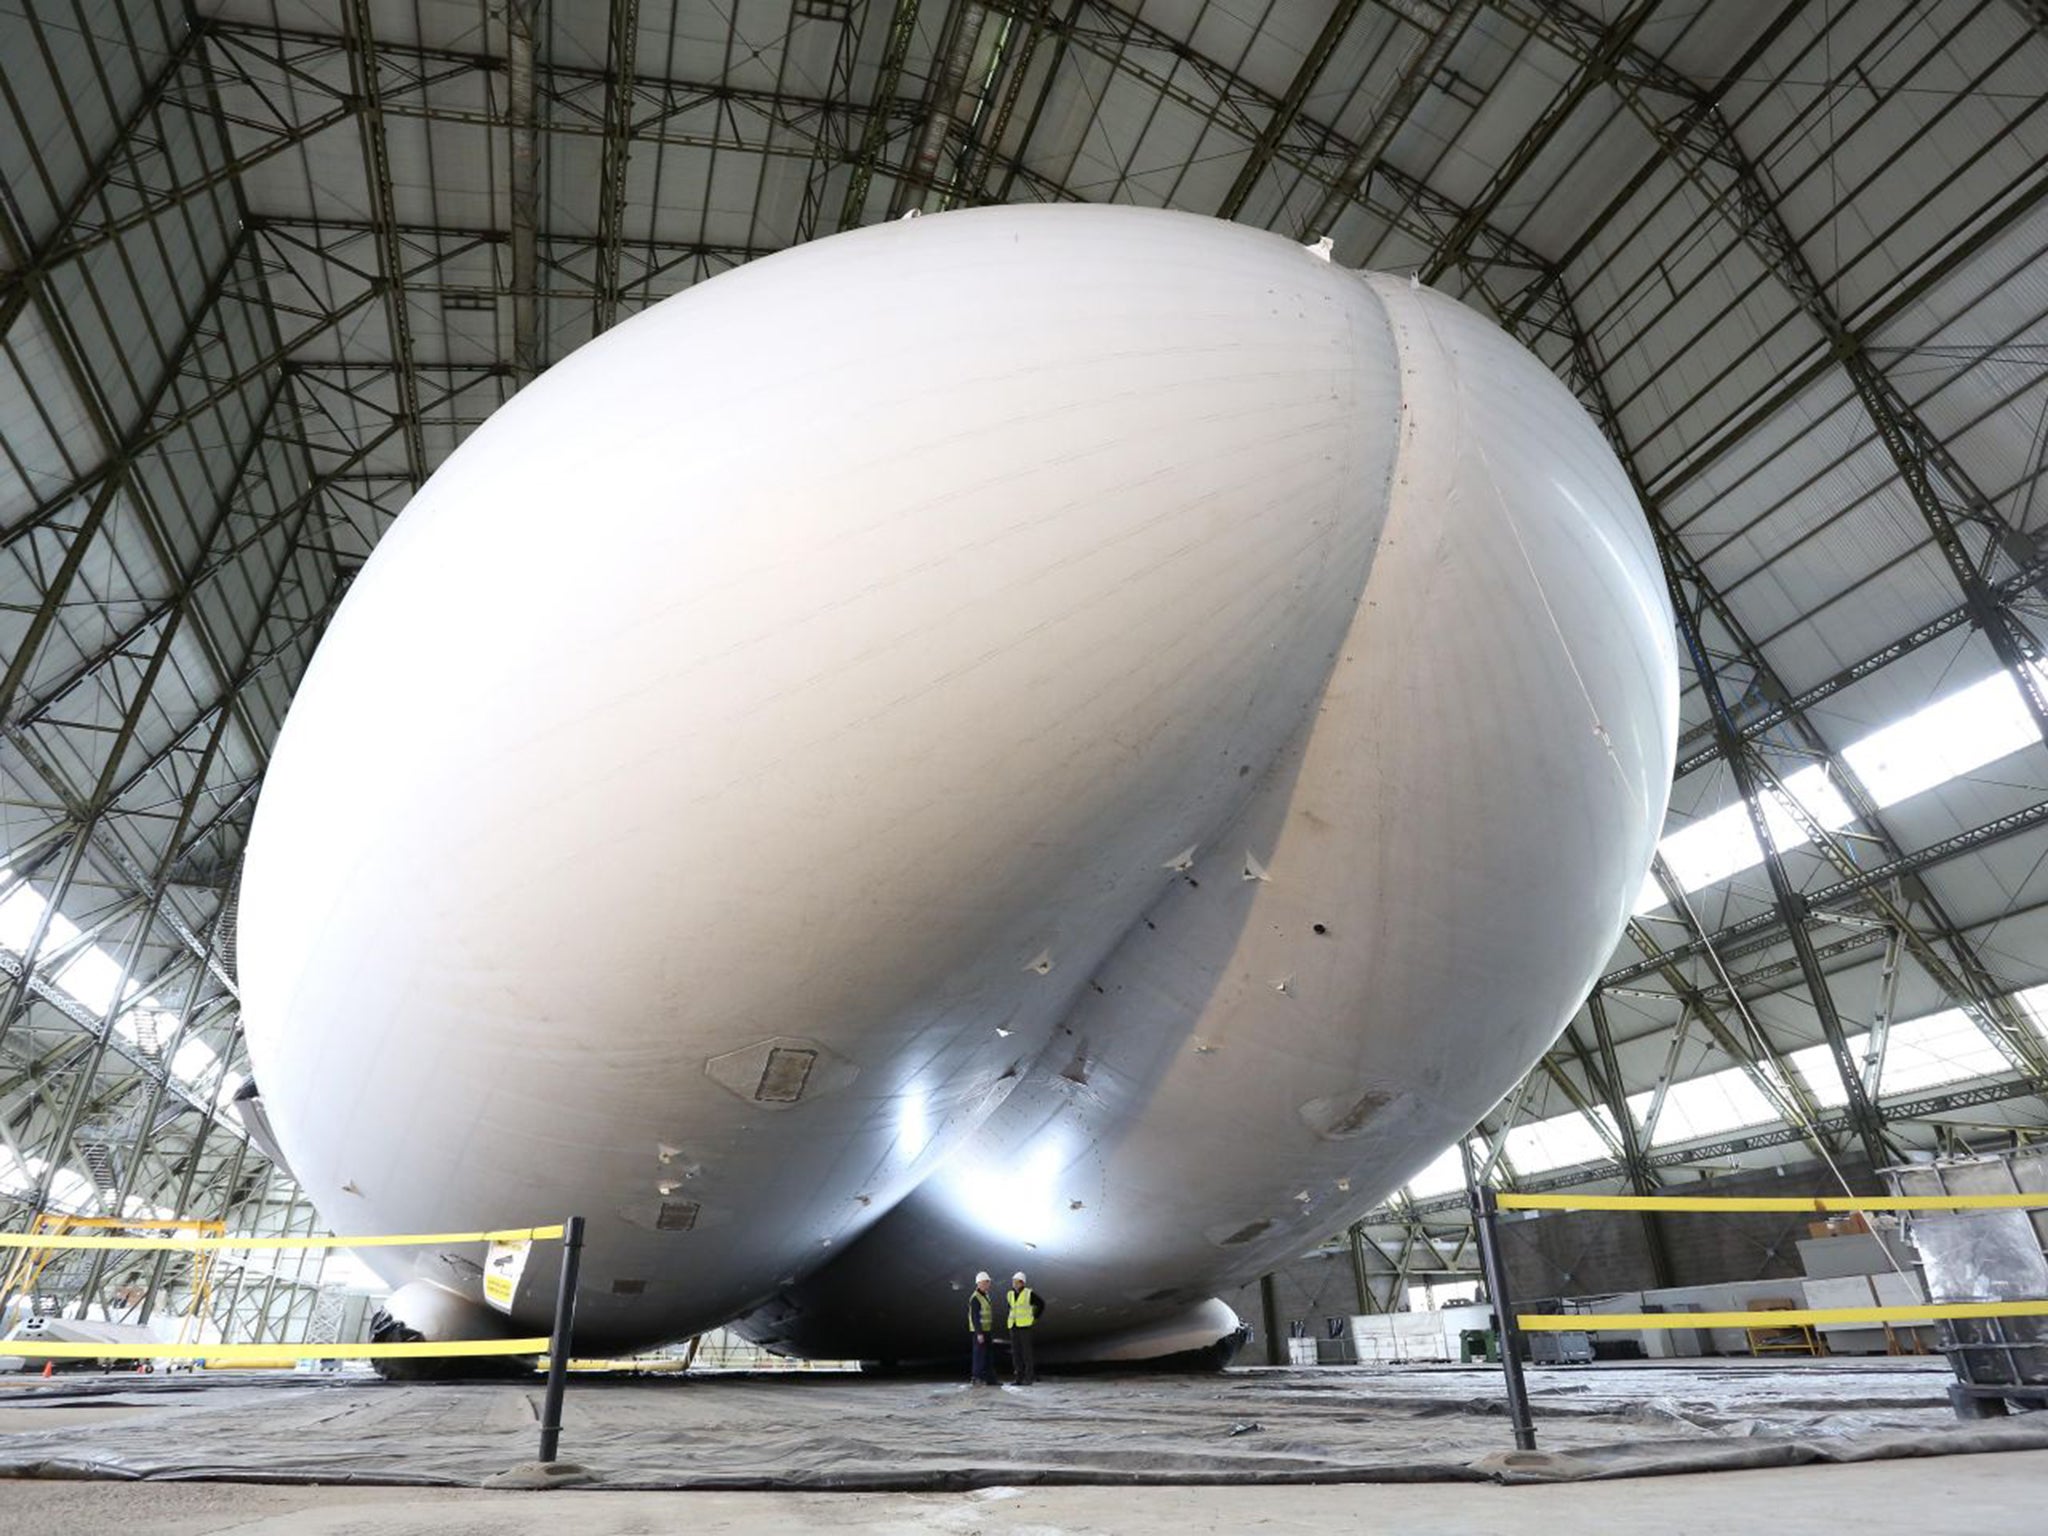 The Airlander in its Bedfordshire hangar